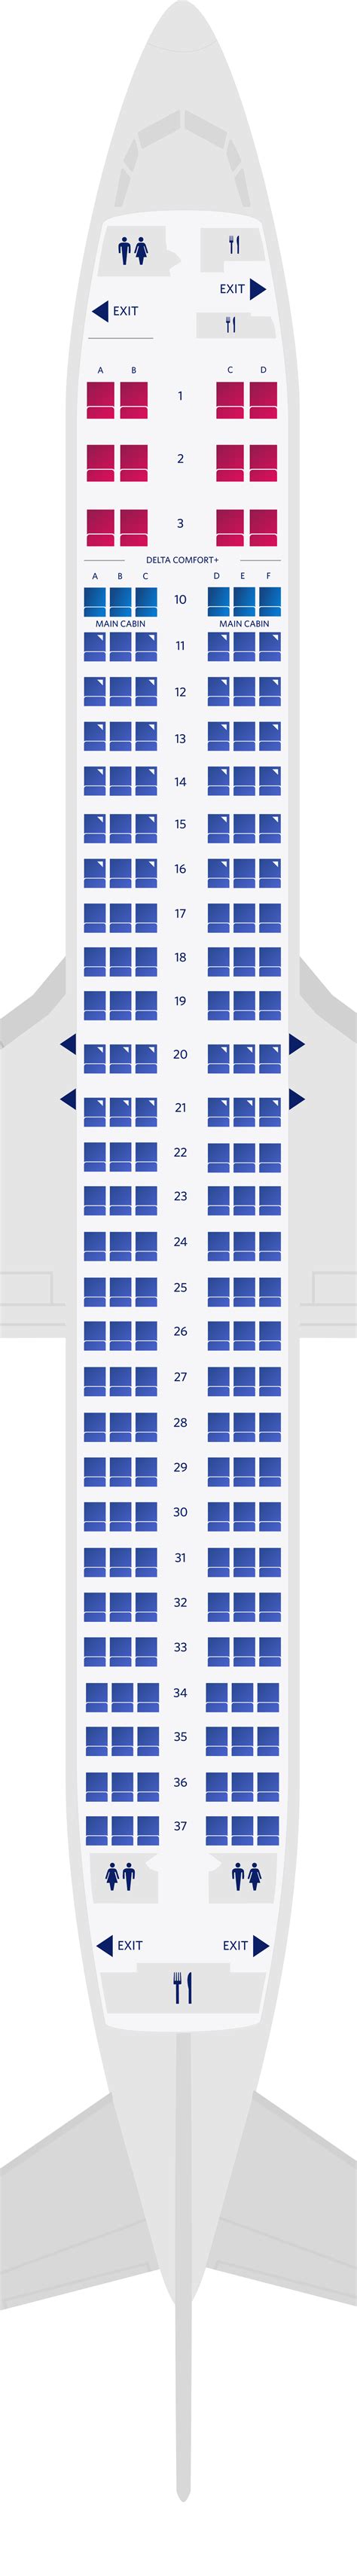 Boeing 787 9 seat map delta. Get Notified. Jump to: Amenities, Reviews, Photos, Seat list, Our take, Map key. The KLM Boeing 787-9 features seats in a 1 cabin configuration. Economy has 270 seats; this is pretty standard for these aircraft. Legroom-wise, the Economy pitch of " is average, though of course what that means for you depends on how tall you are! 